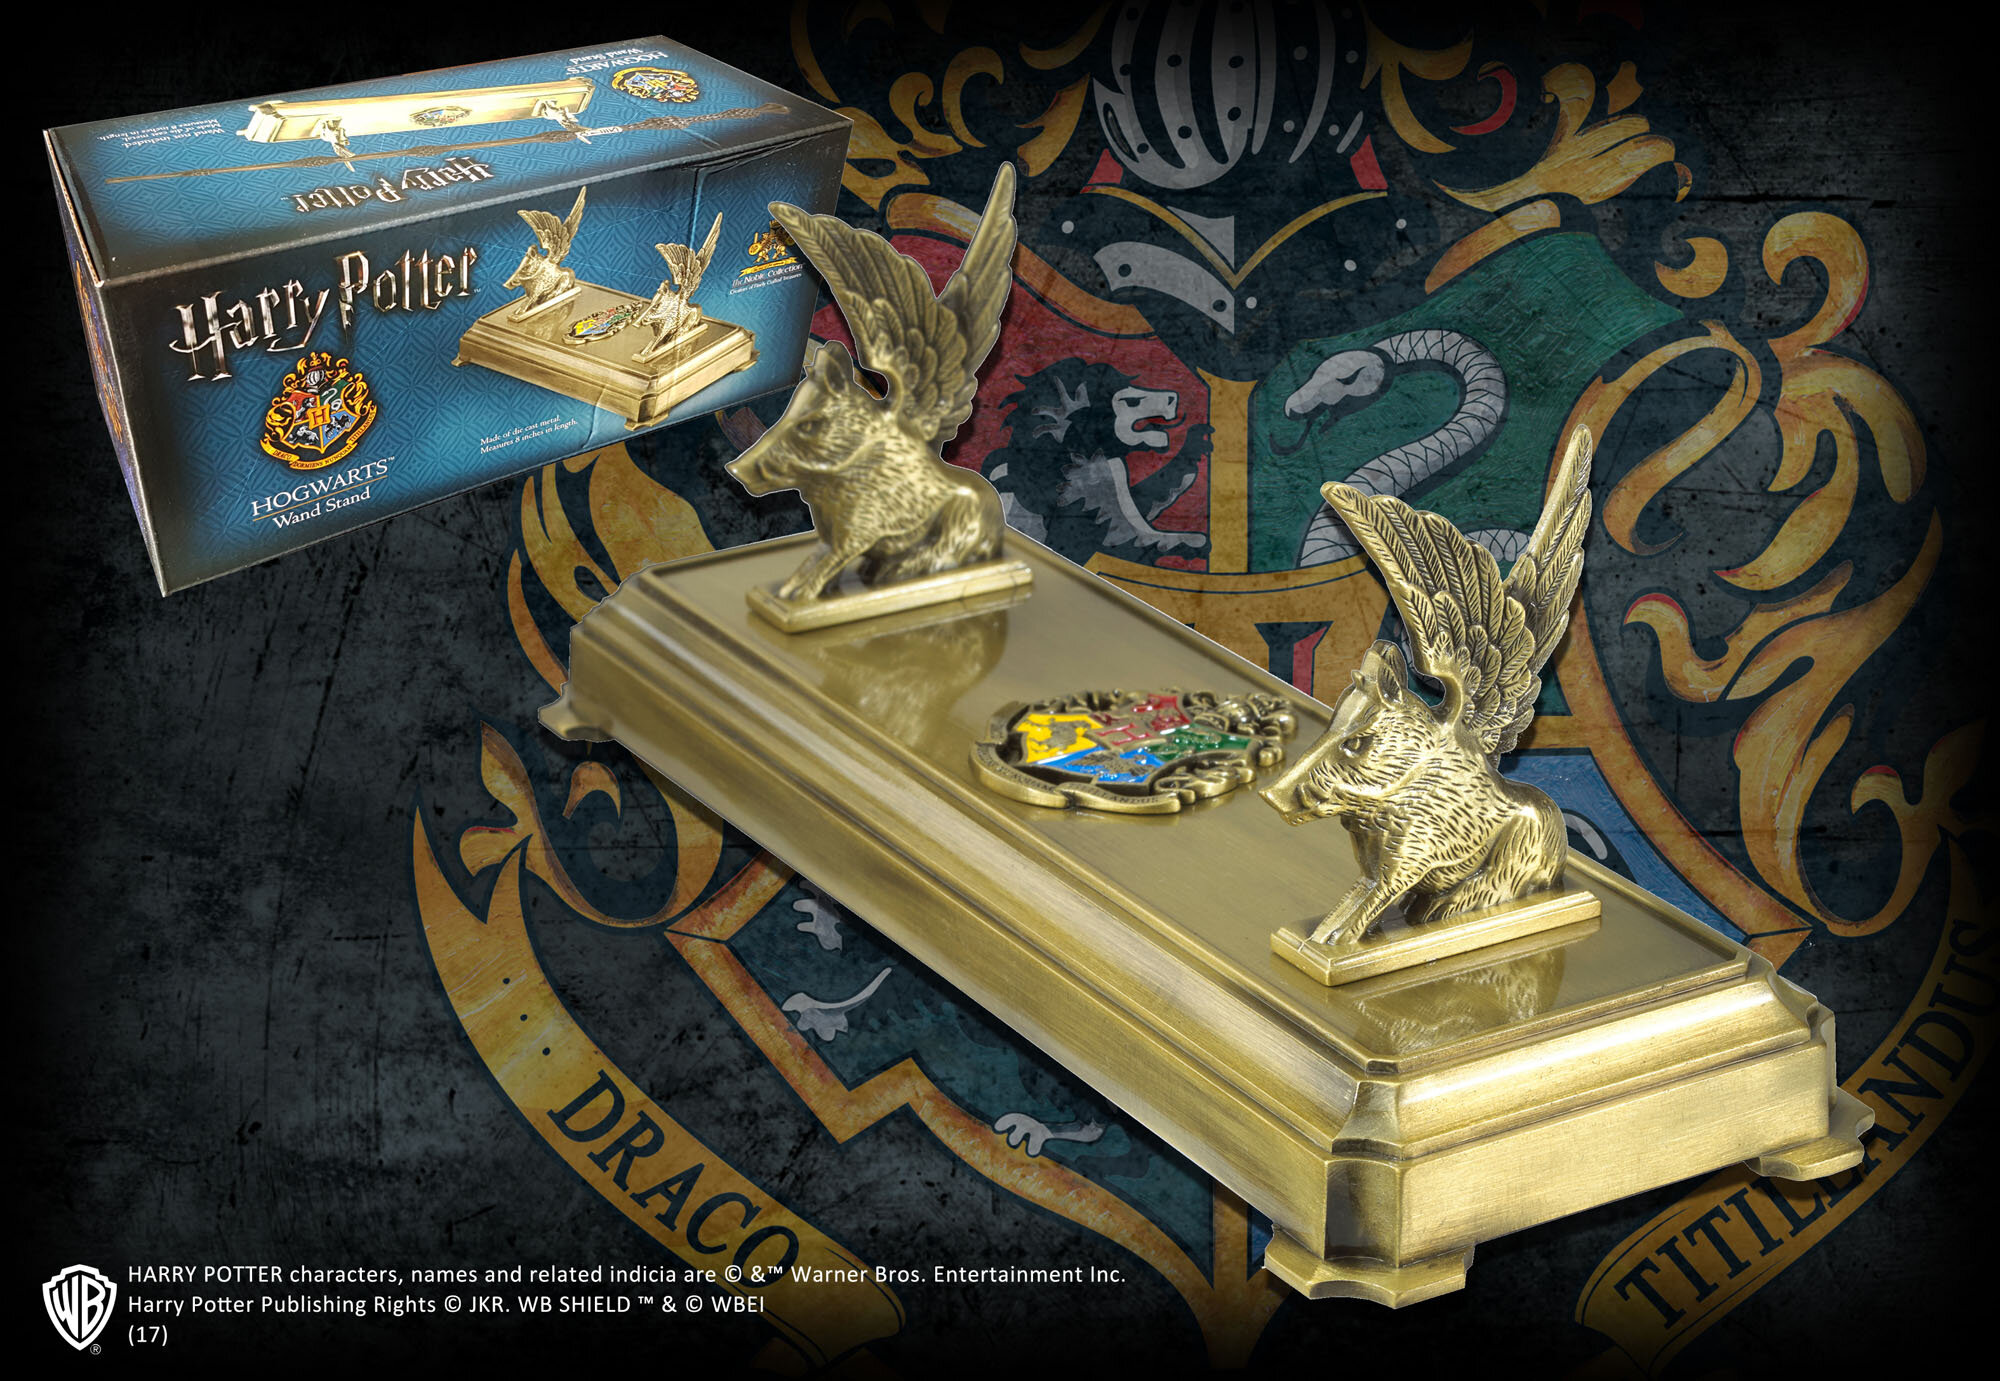 NEW Universal Studios Wizarding World of Harry Potter Wand Display Stand 